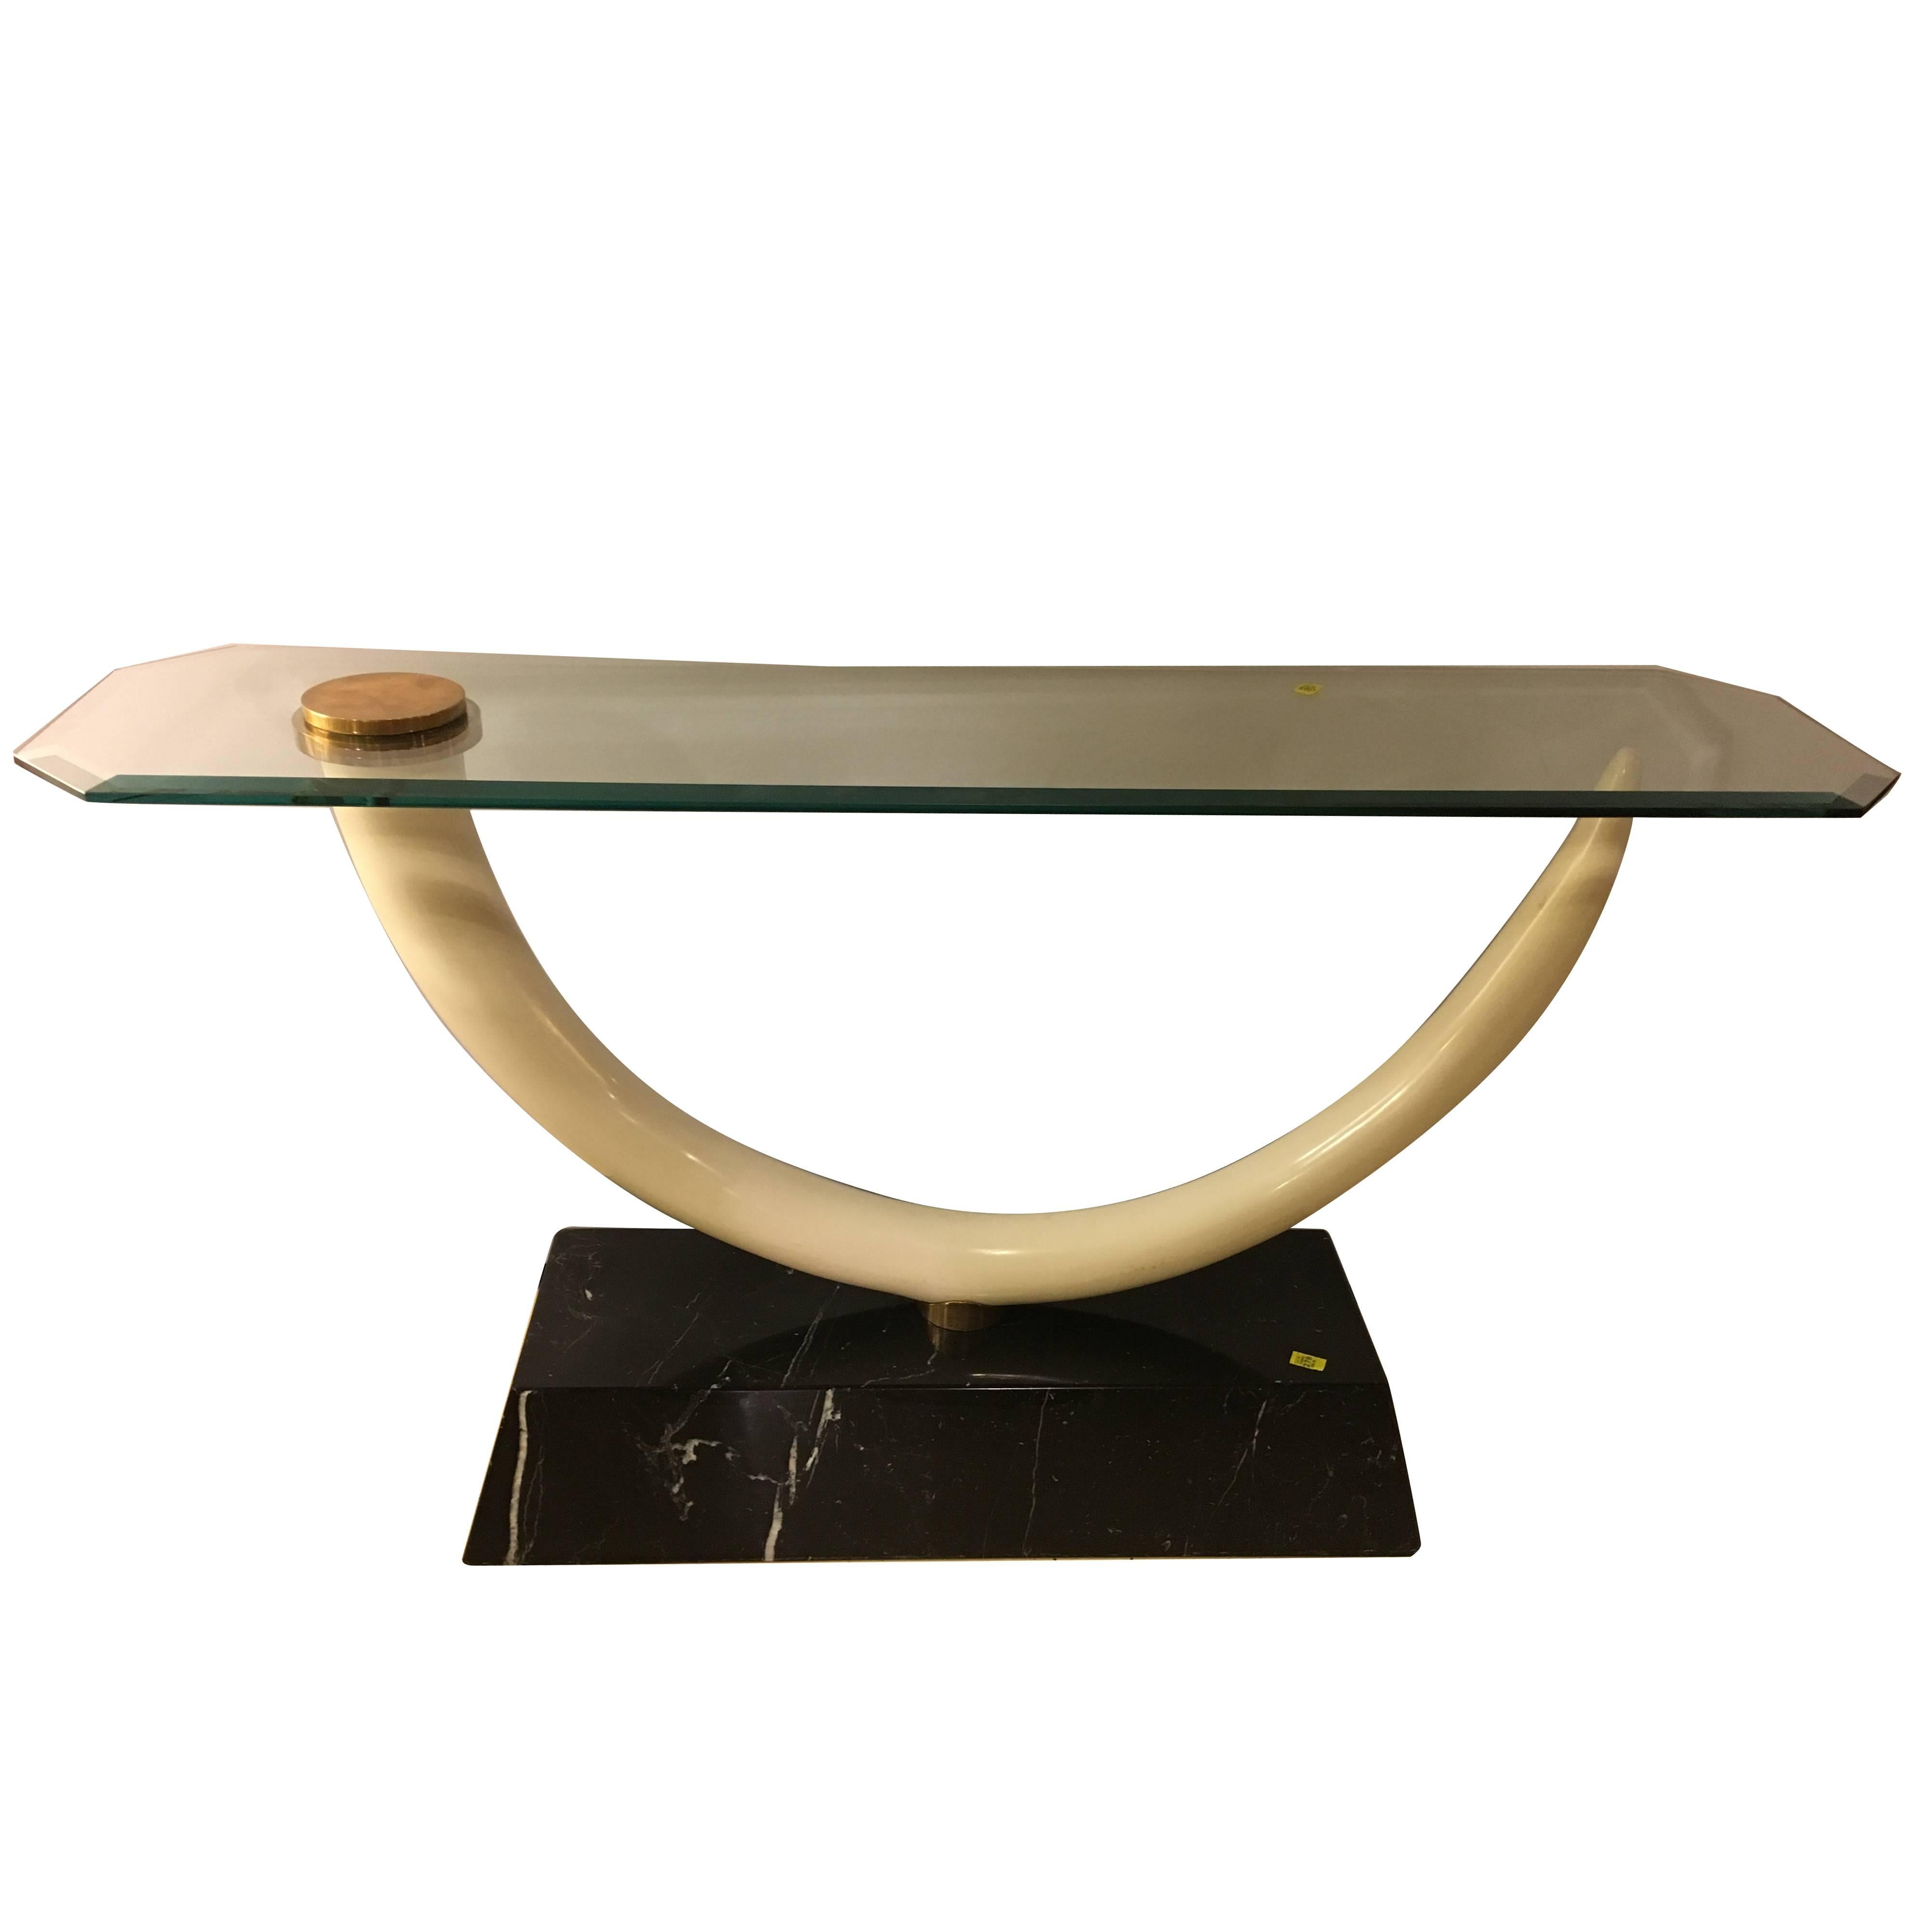 Elephant Tusk Glass Top and Marble Based Console Table